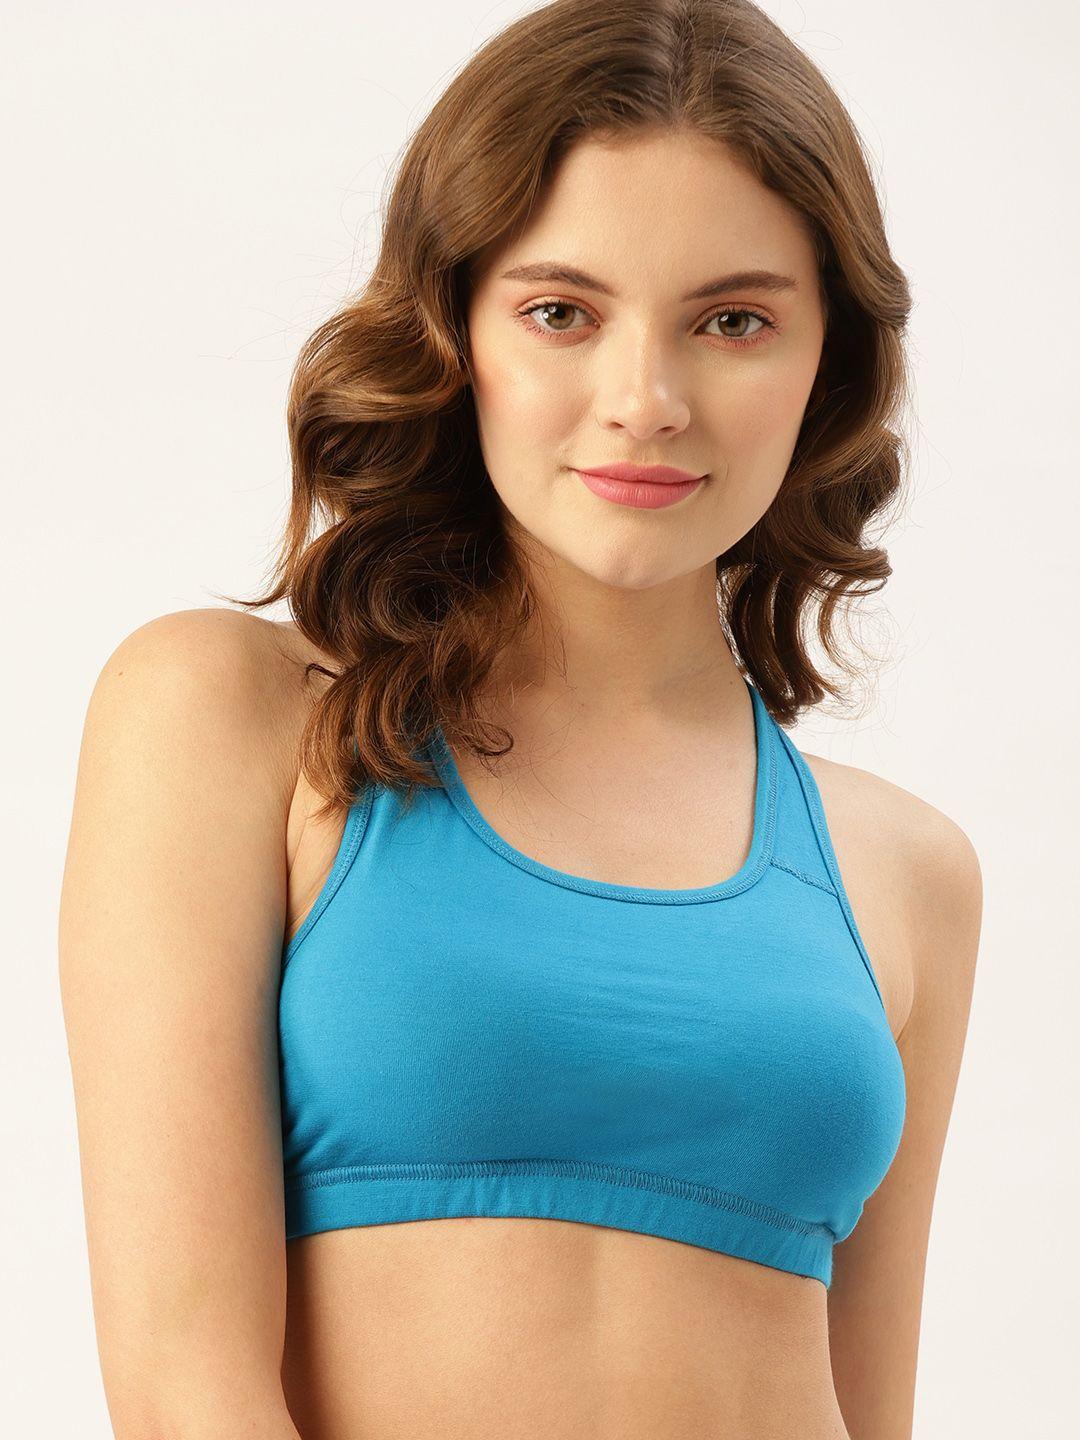 dressberry blue sports bra non-wired non-padded